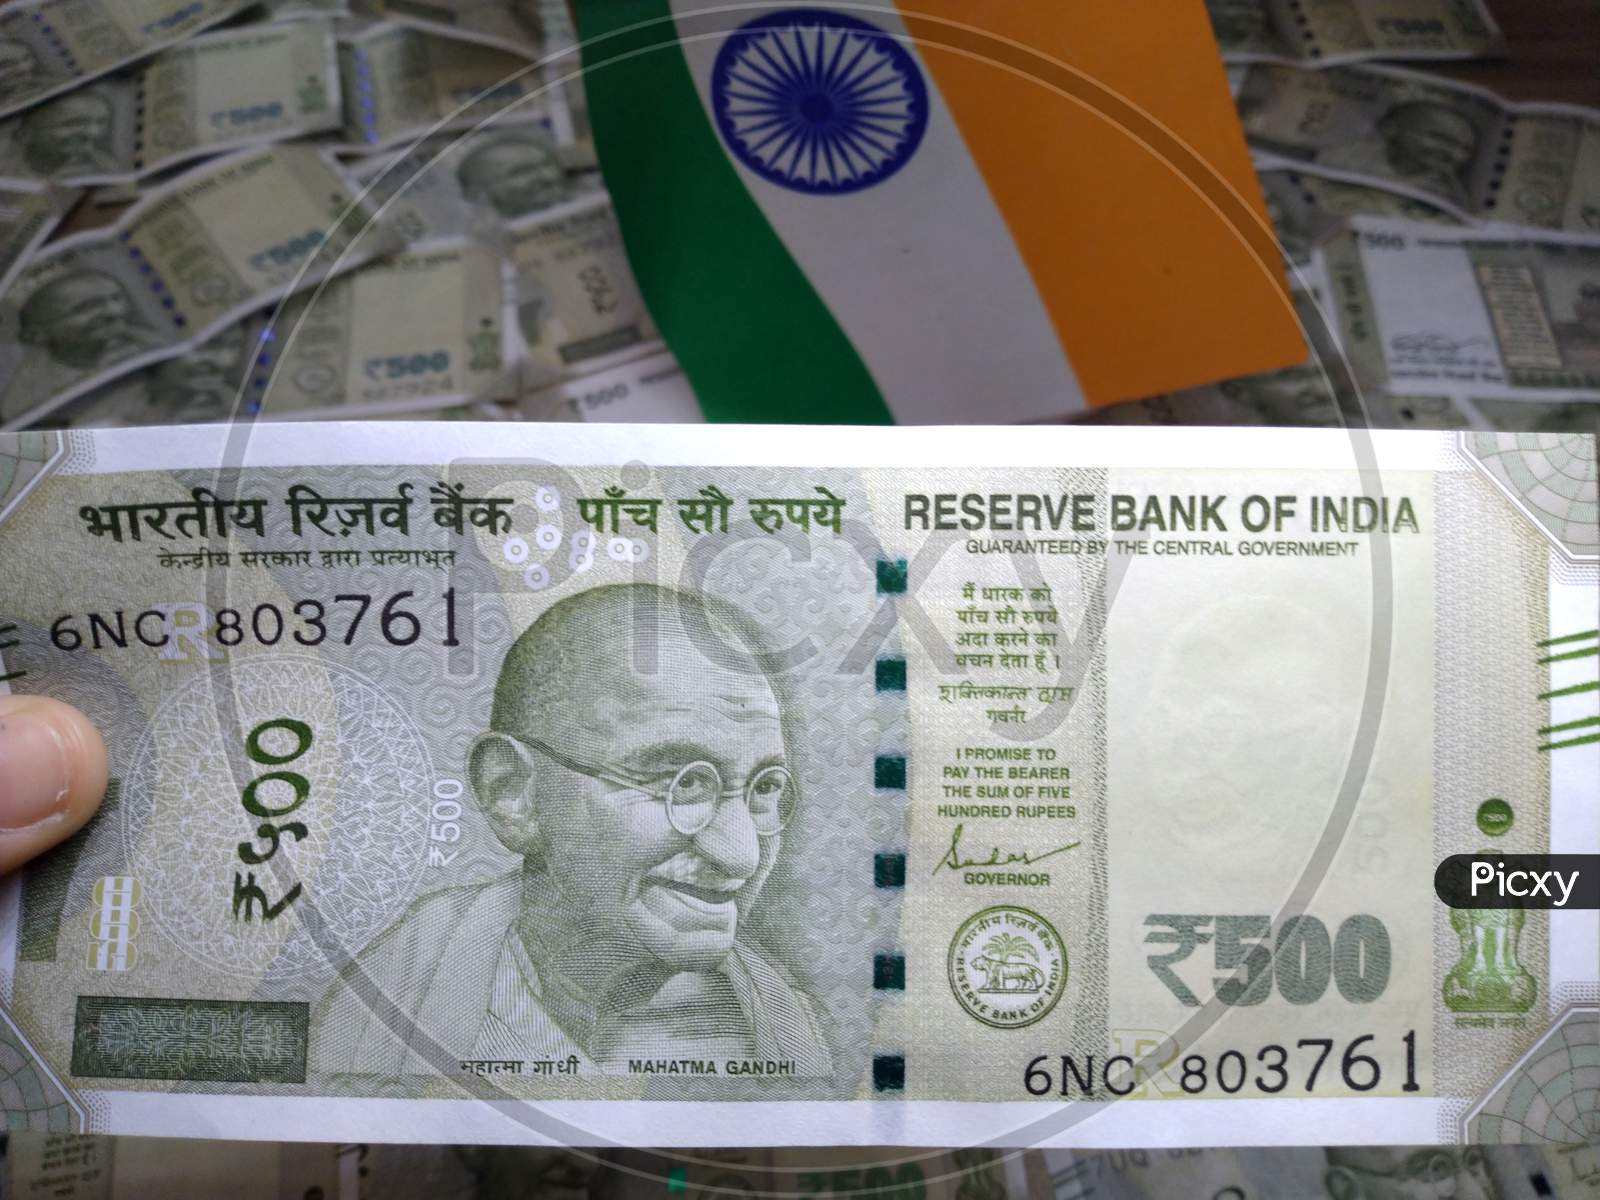 Indian Currency,New 500 Rupee Note With Inaian National Flag